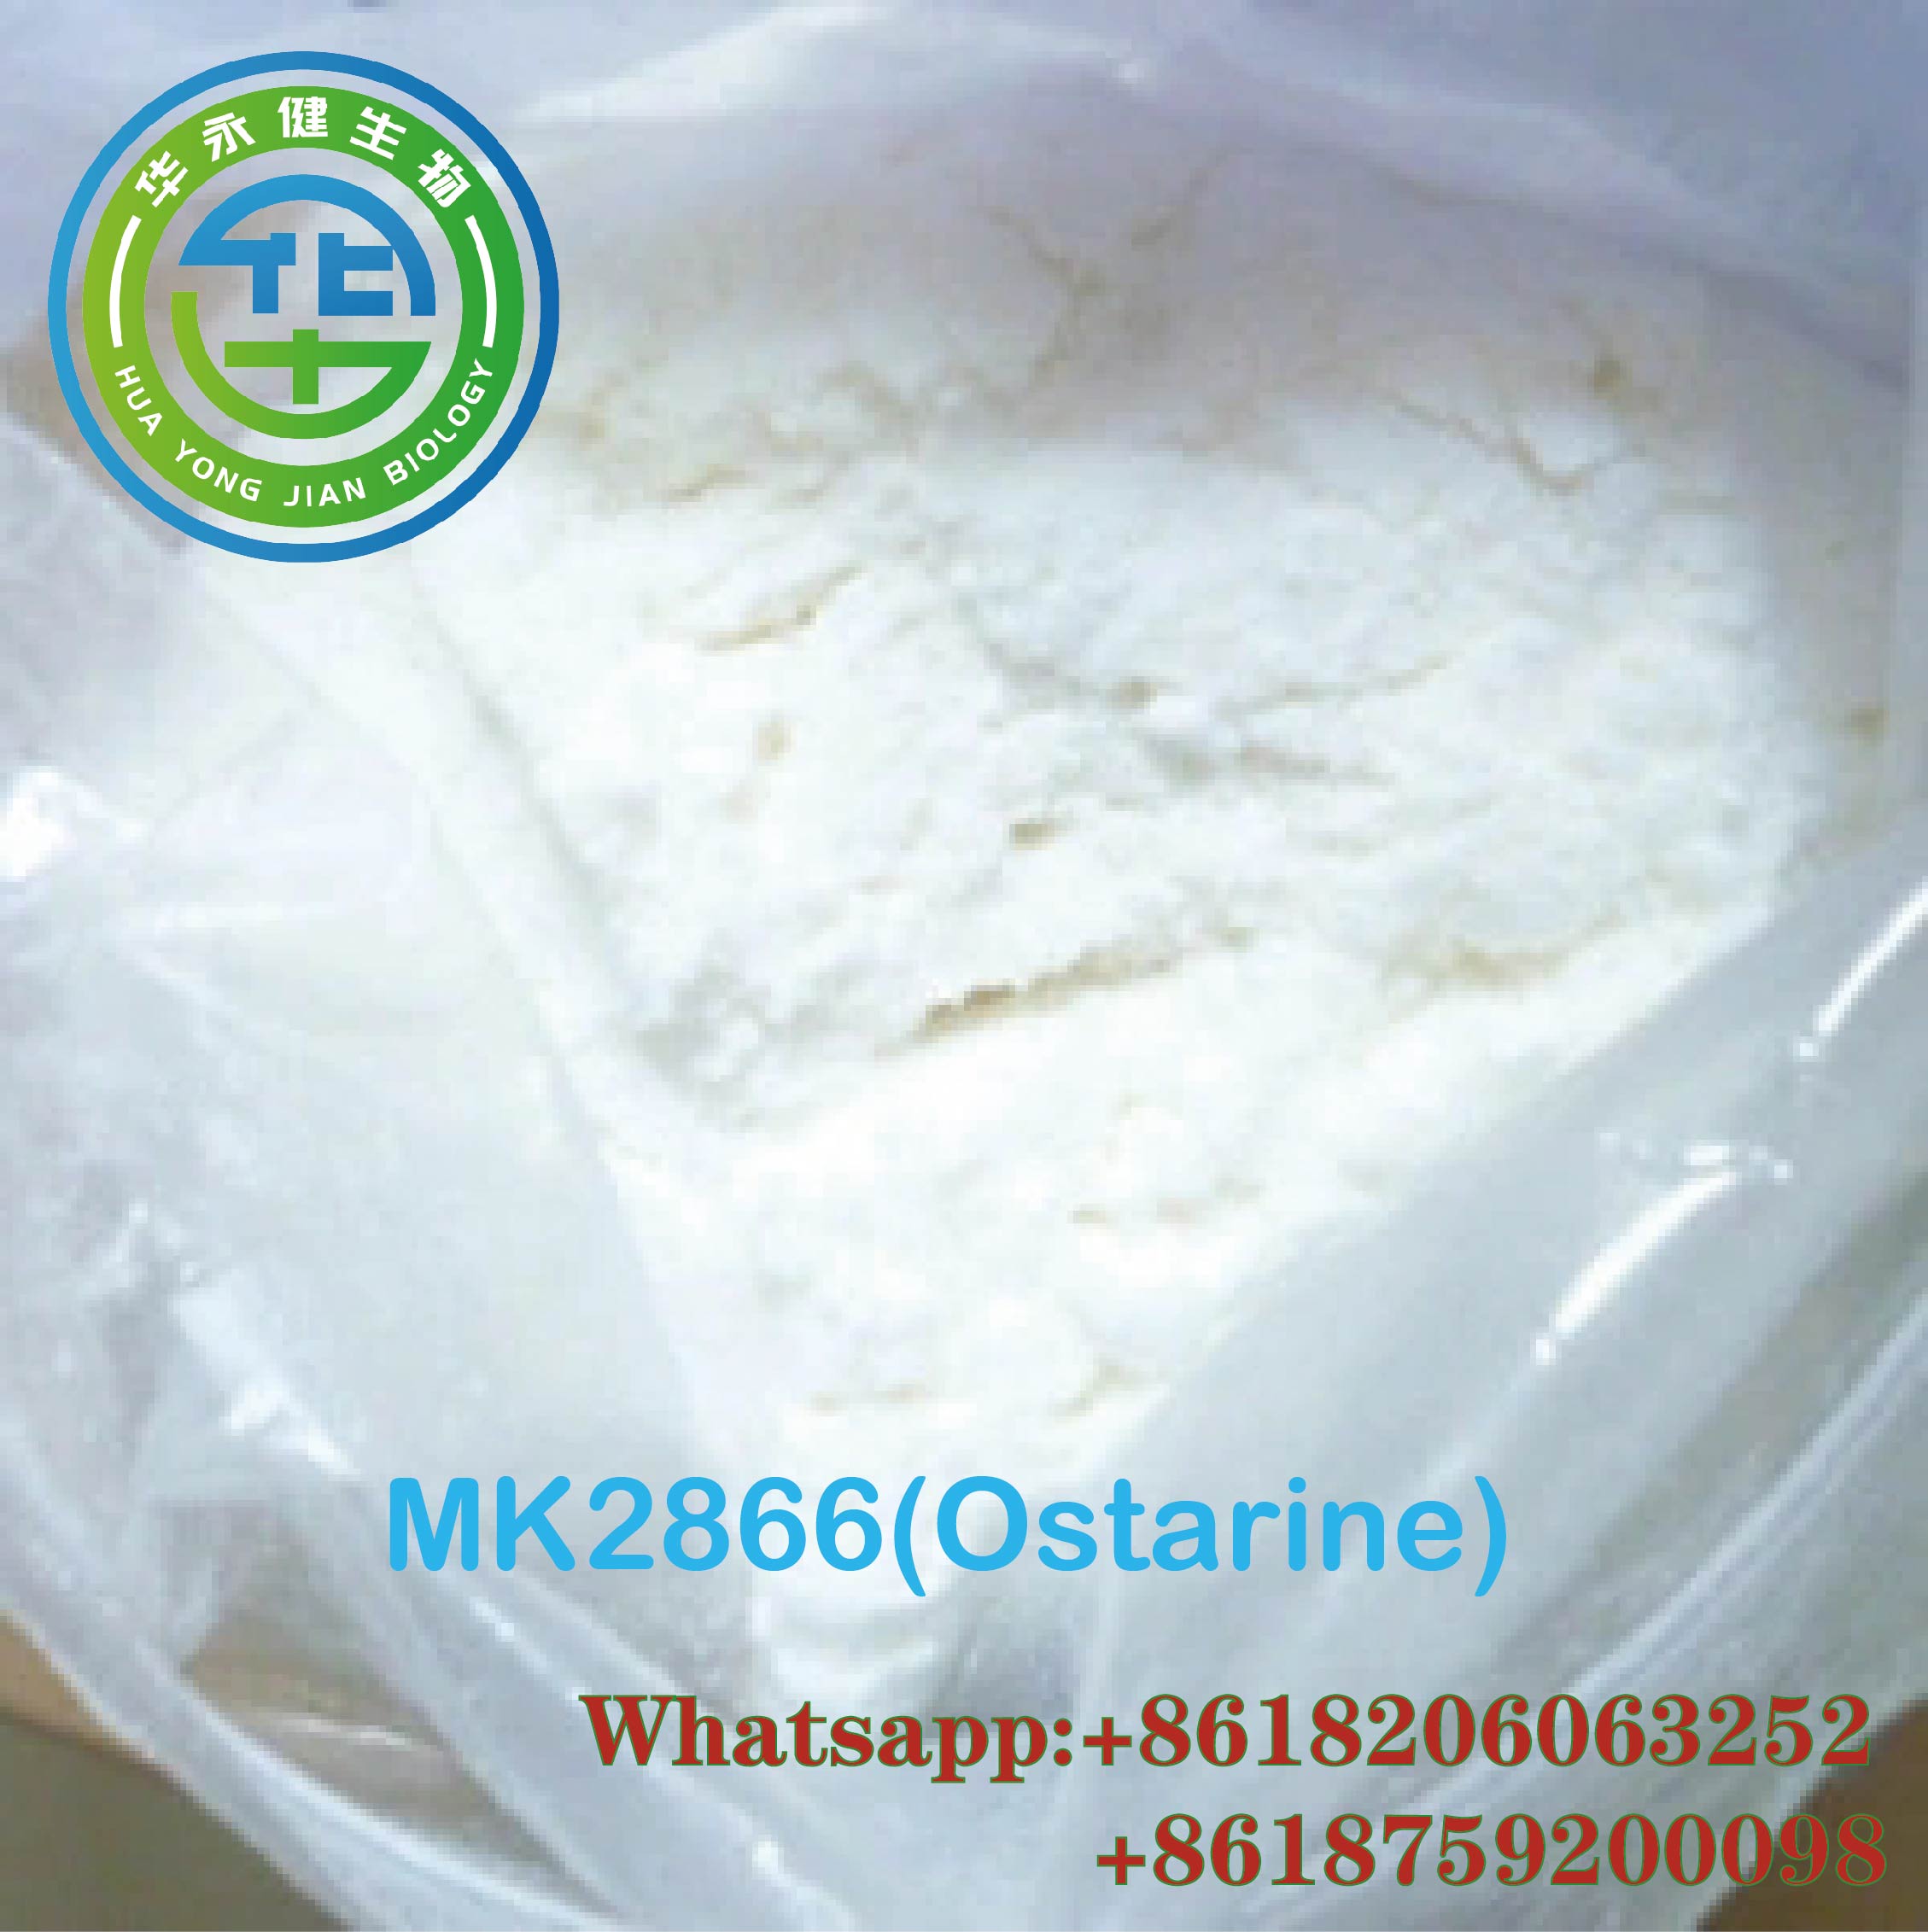 99% Ostarine Steroids Raw Sarm Powder 100% Customs Pass MK2866 with Perfect Stealth Package CasNO.841205-47-8